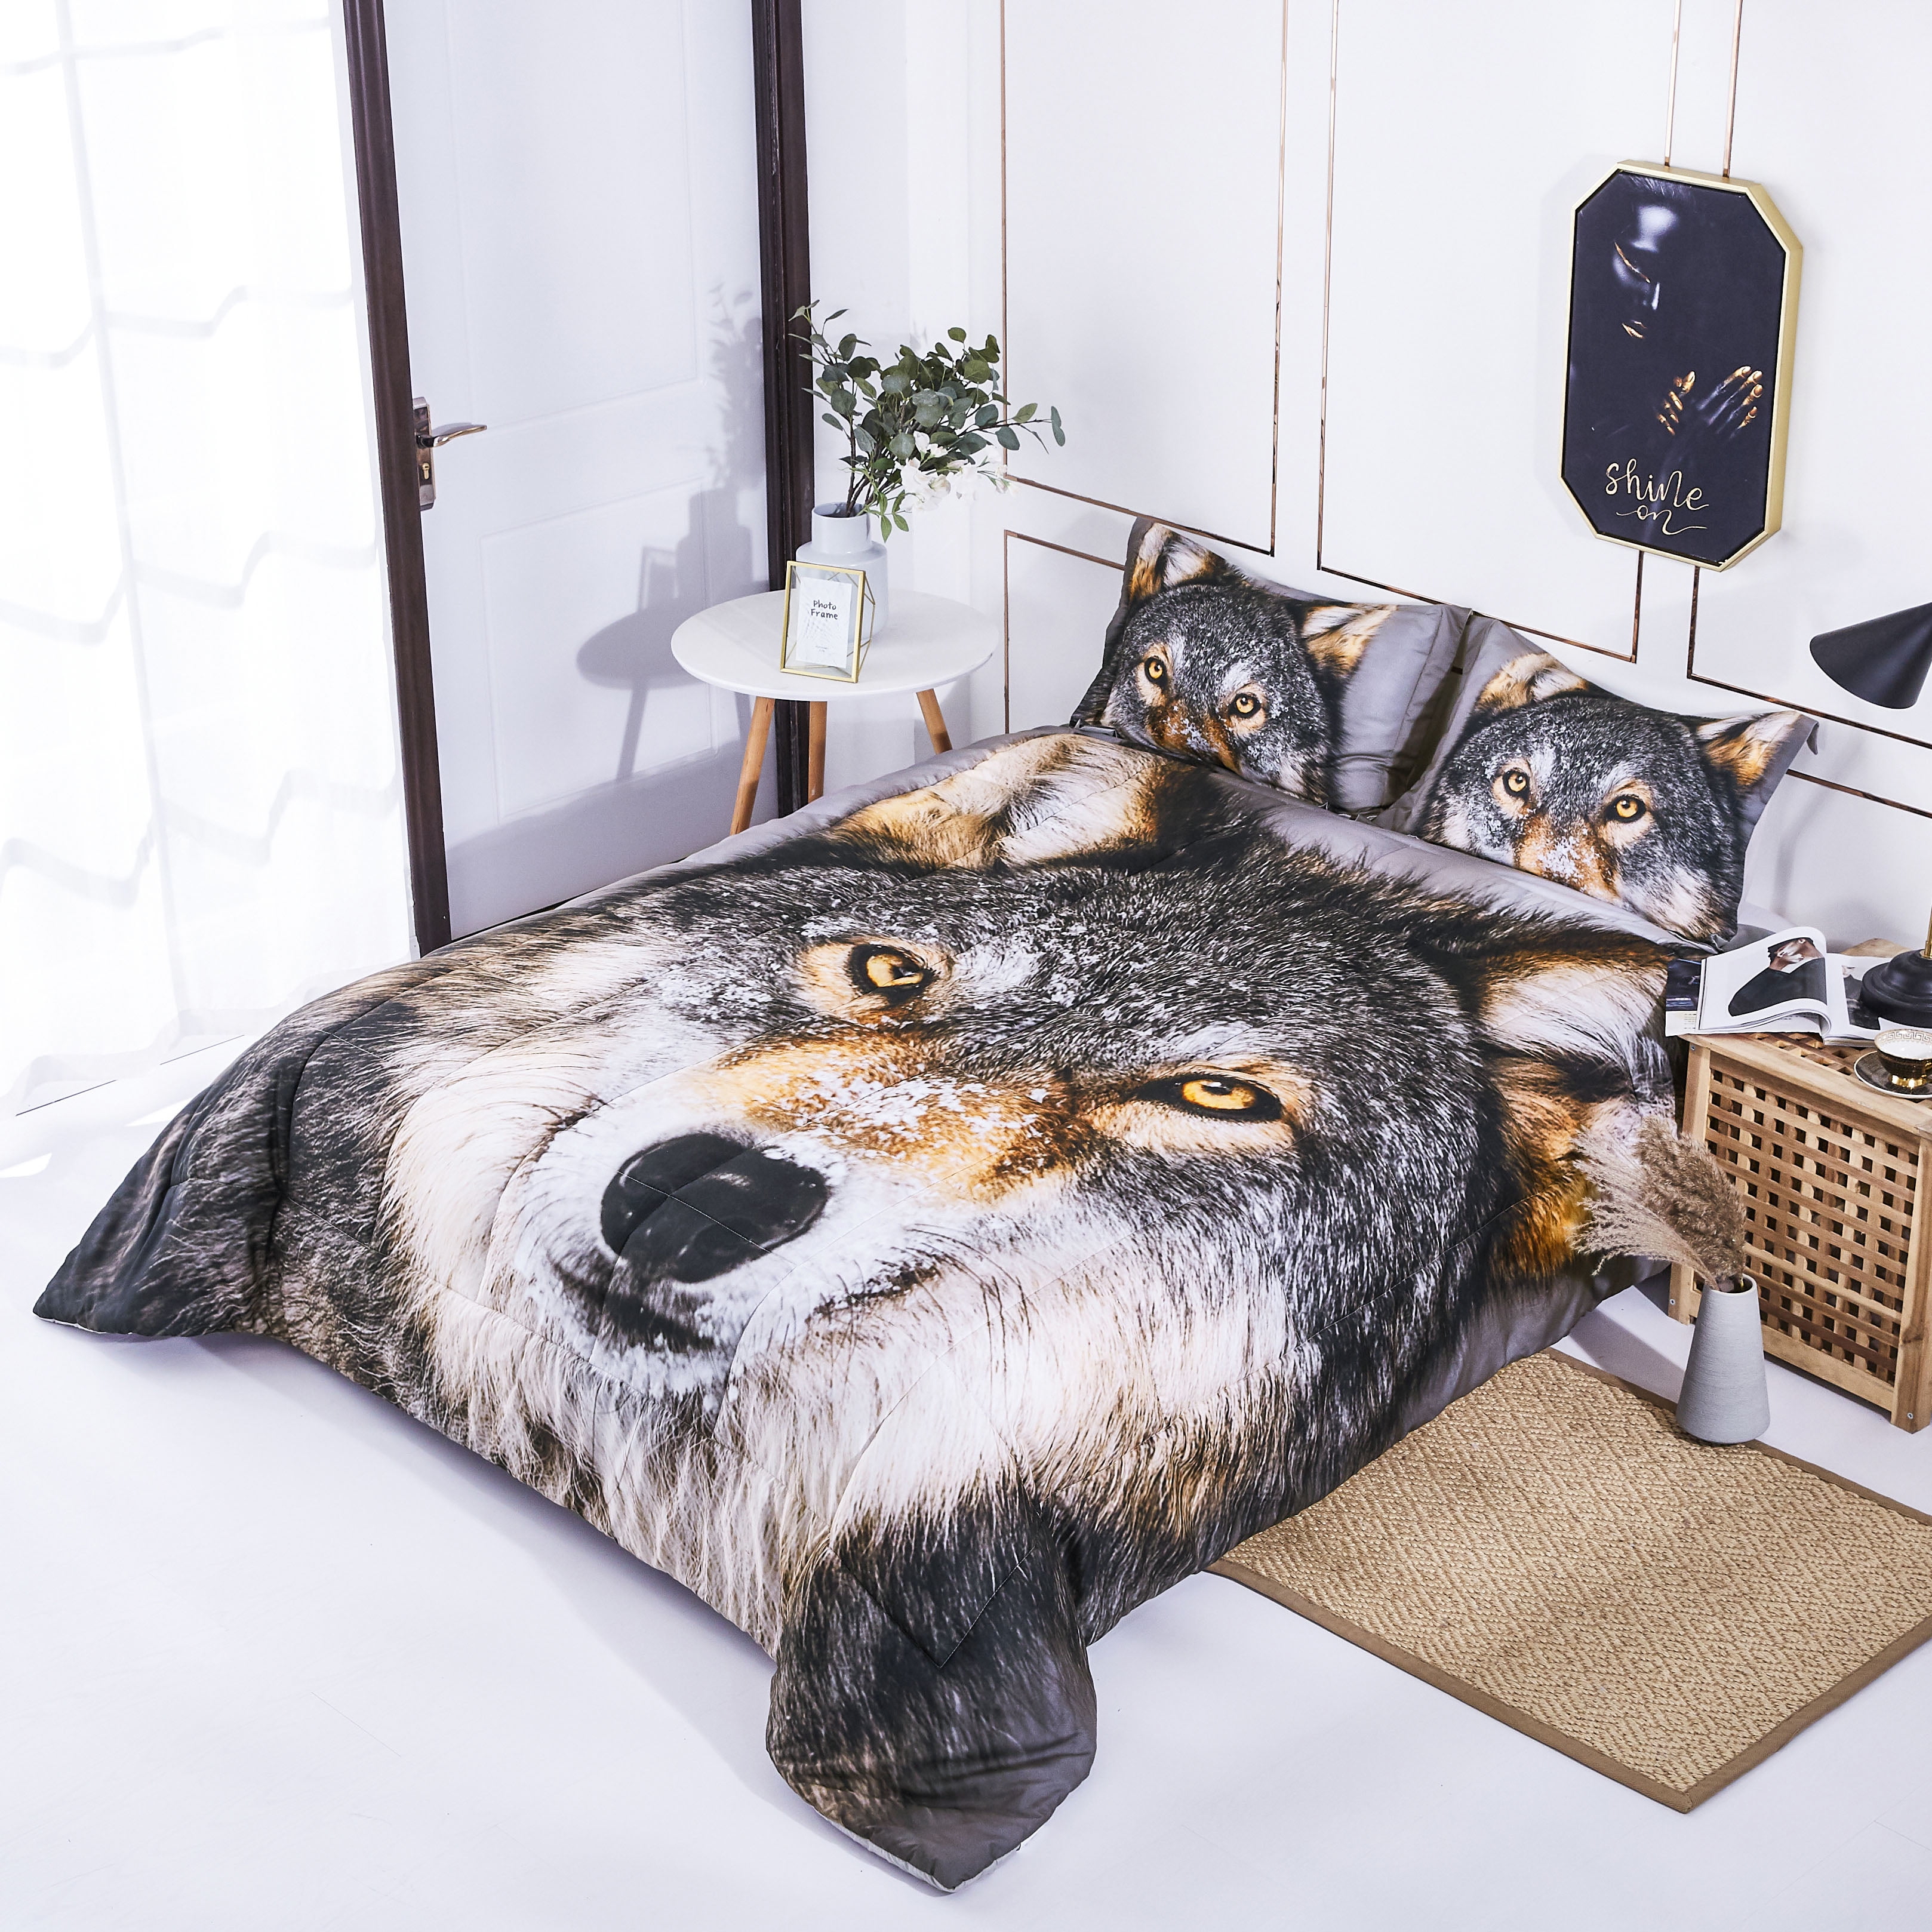 Babycare Pro Wolf Print 3D Bedding Sets with Comforter Twin Size for Kids Twin Comforter Sets Twin Size 5 Pieces,2 Pillowcases,1 Flat Sheet 1 Comforter,1 Duvet Cover